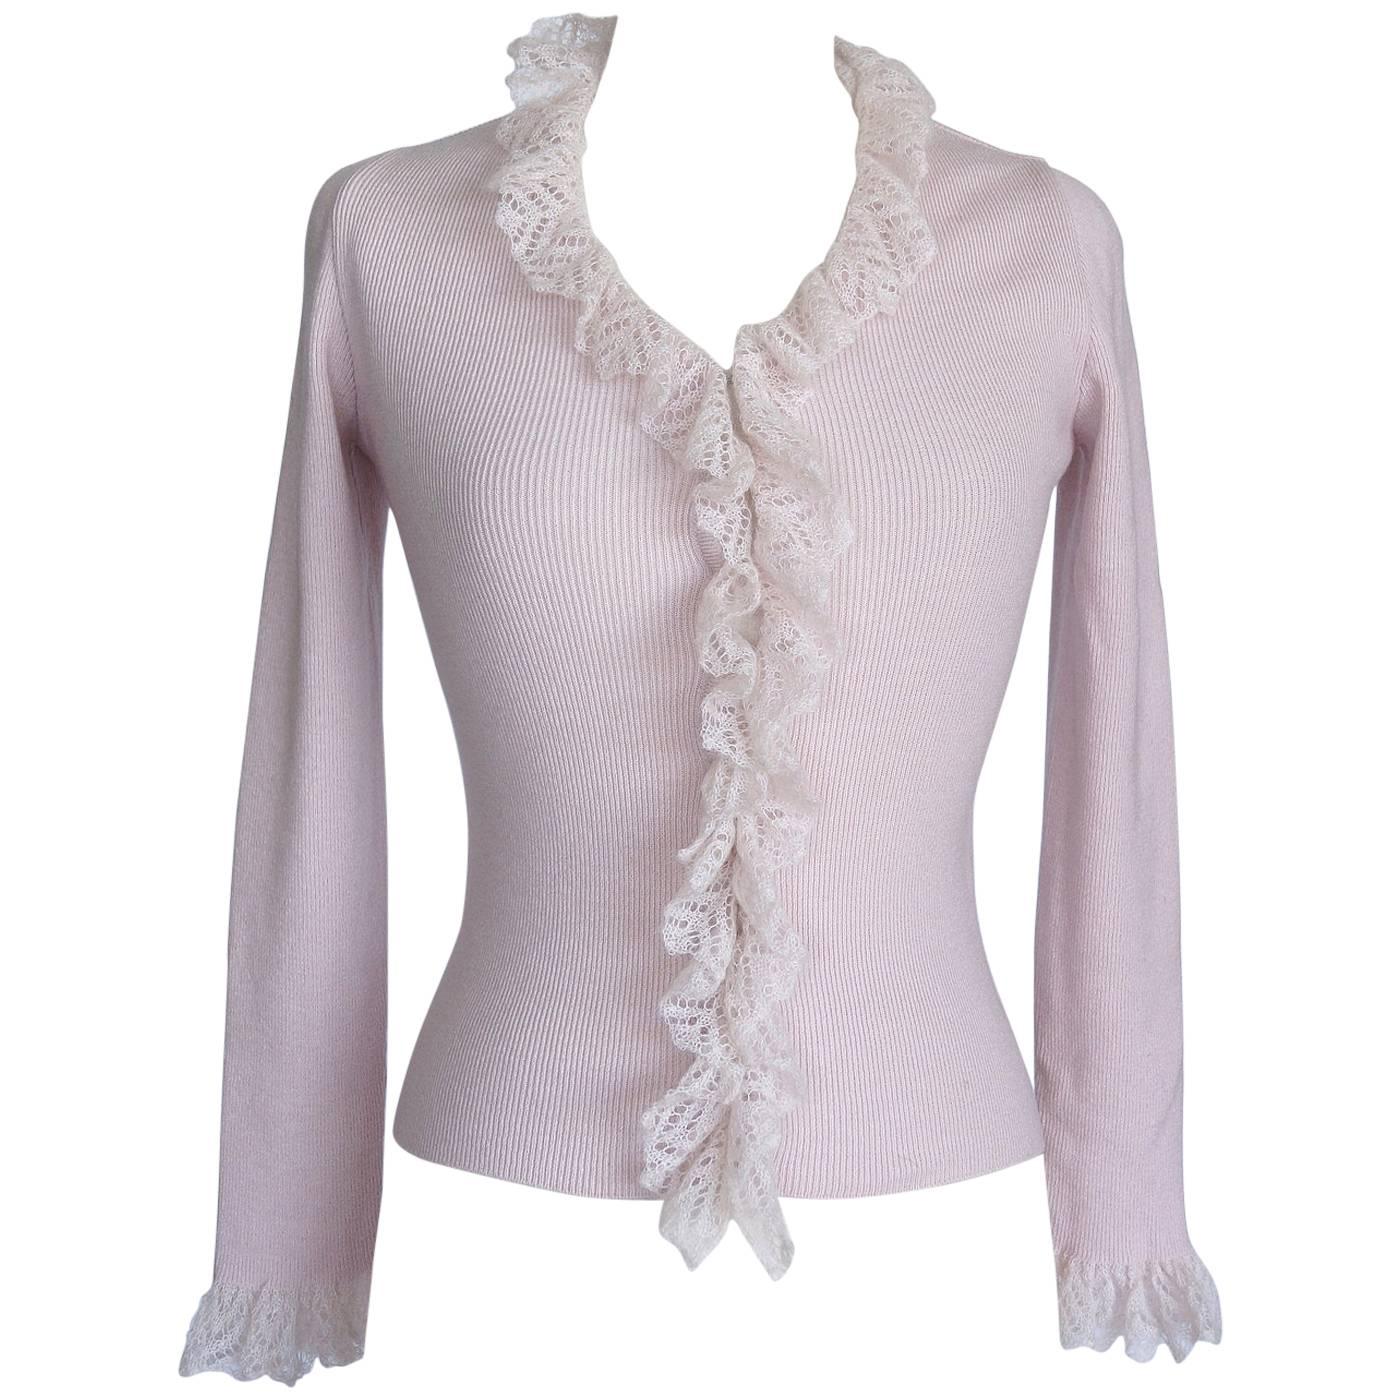 MOSCHINO Vintage Cardigan / Top Soft Pink Charming Delicate Ruffle 42 fits 4-6 